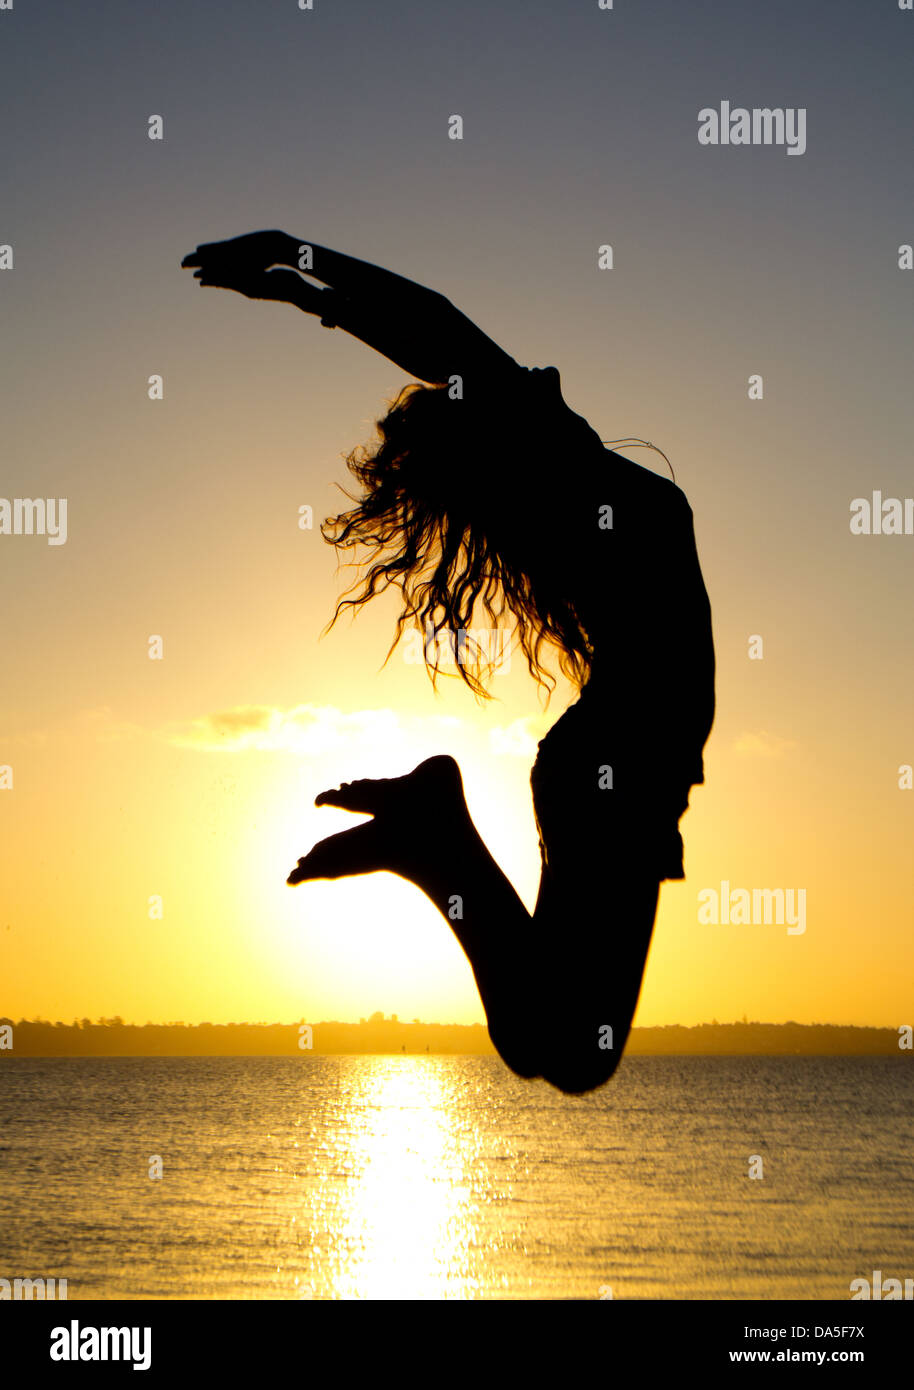 A silhouette of a jumping woman Stock Photo